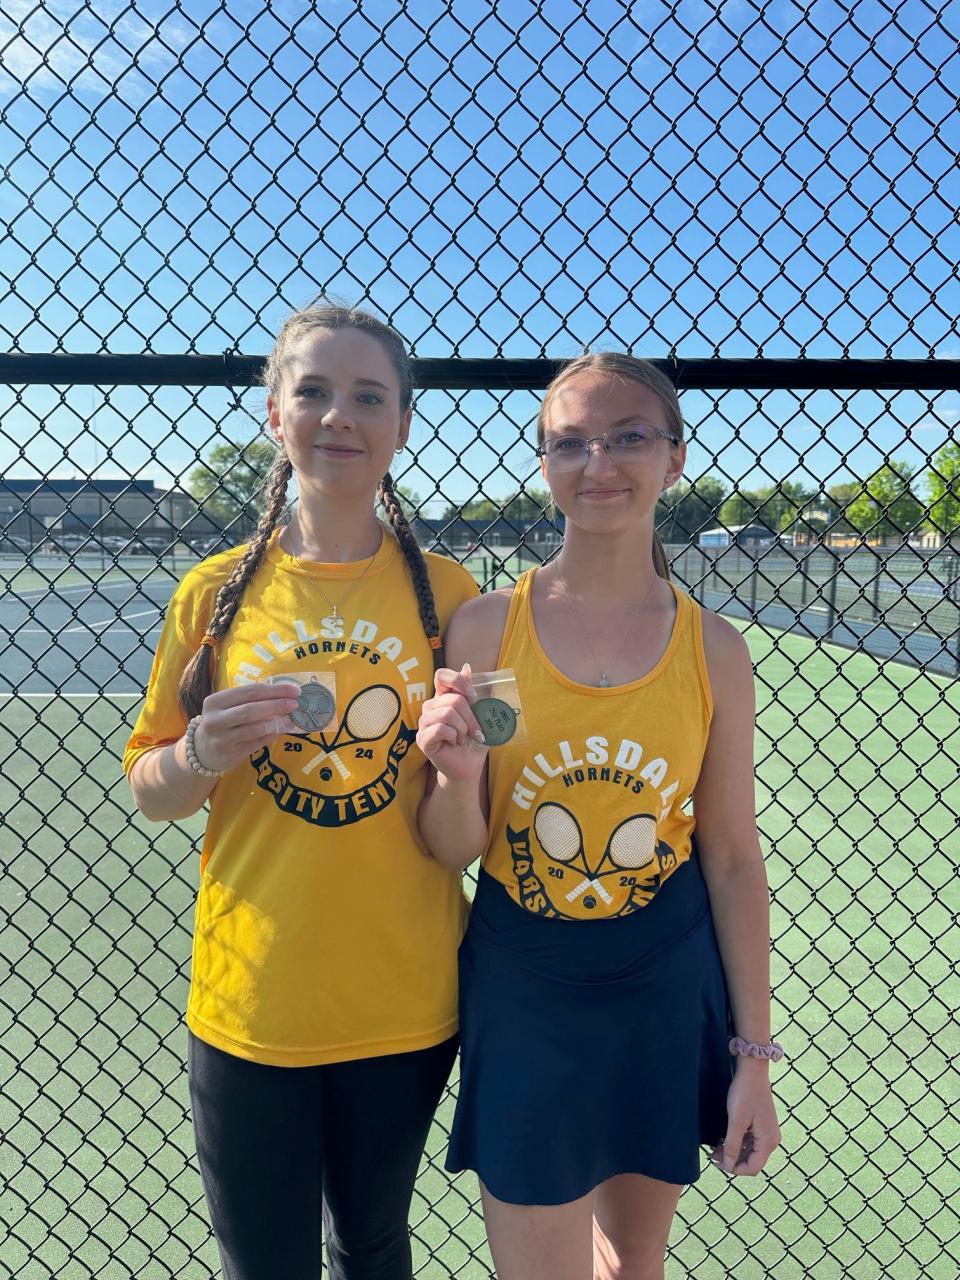 The No. 4 doubles team Olivia Kuenzer and Emily Butterbaugh took second for Hillsdale girls tennis at the SMITL tournament.